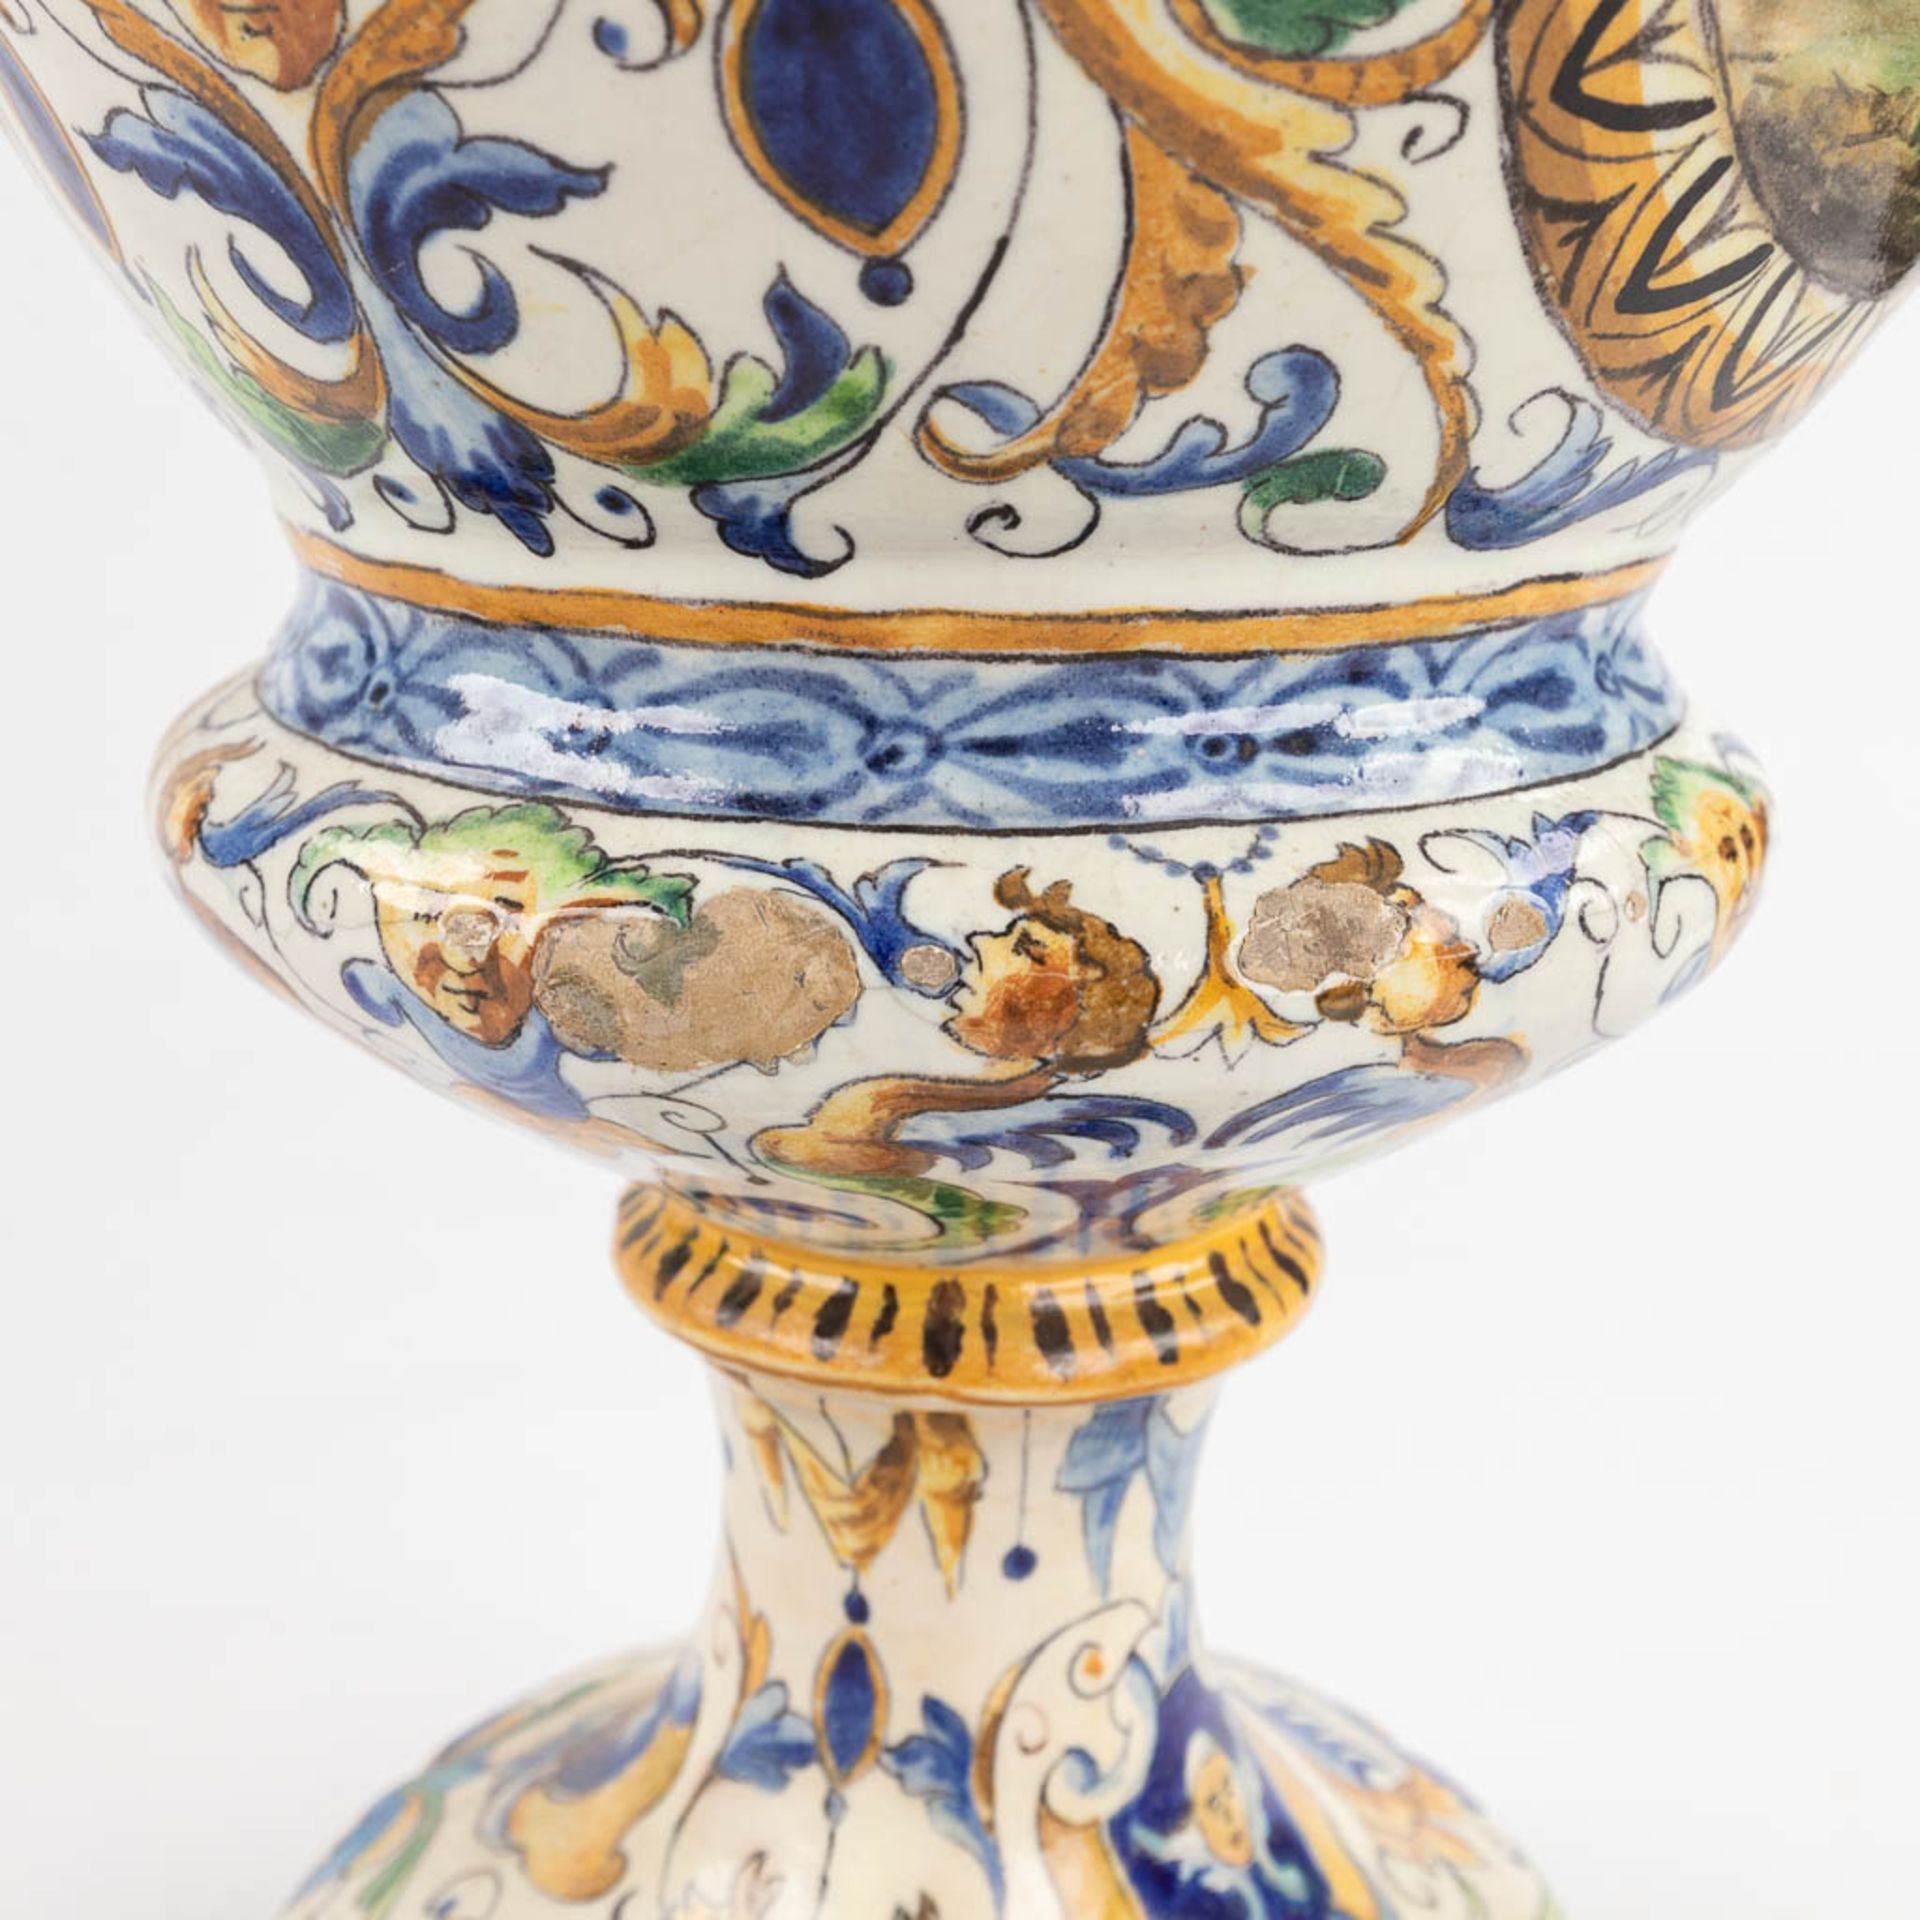 A pair of large vases, Italian Renaissance style, glazed faience. 20th C. (D:45 x W:45 x H:205 cm) - Image 21 of 31